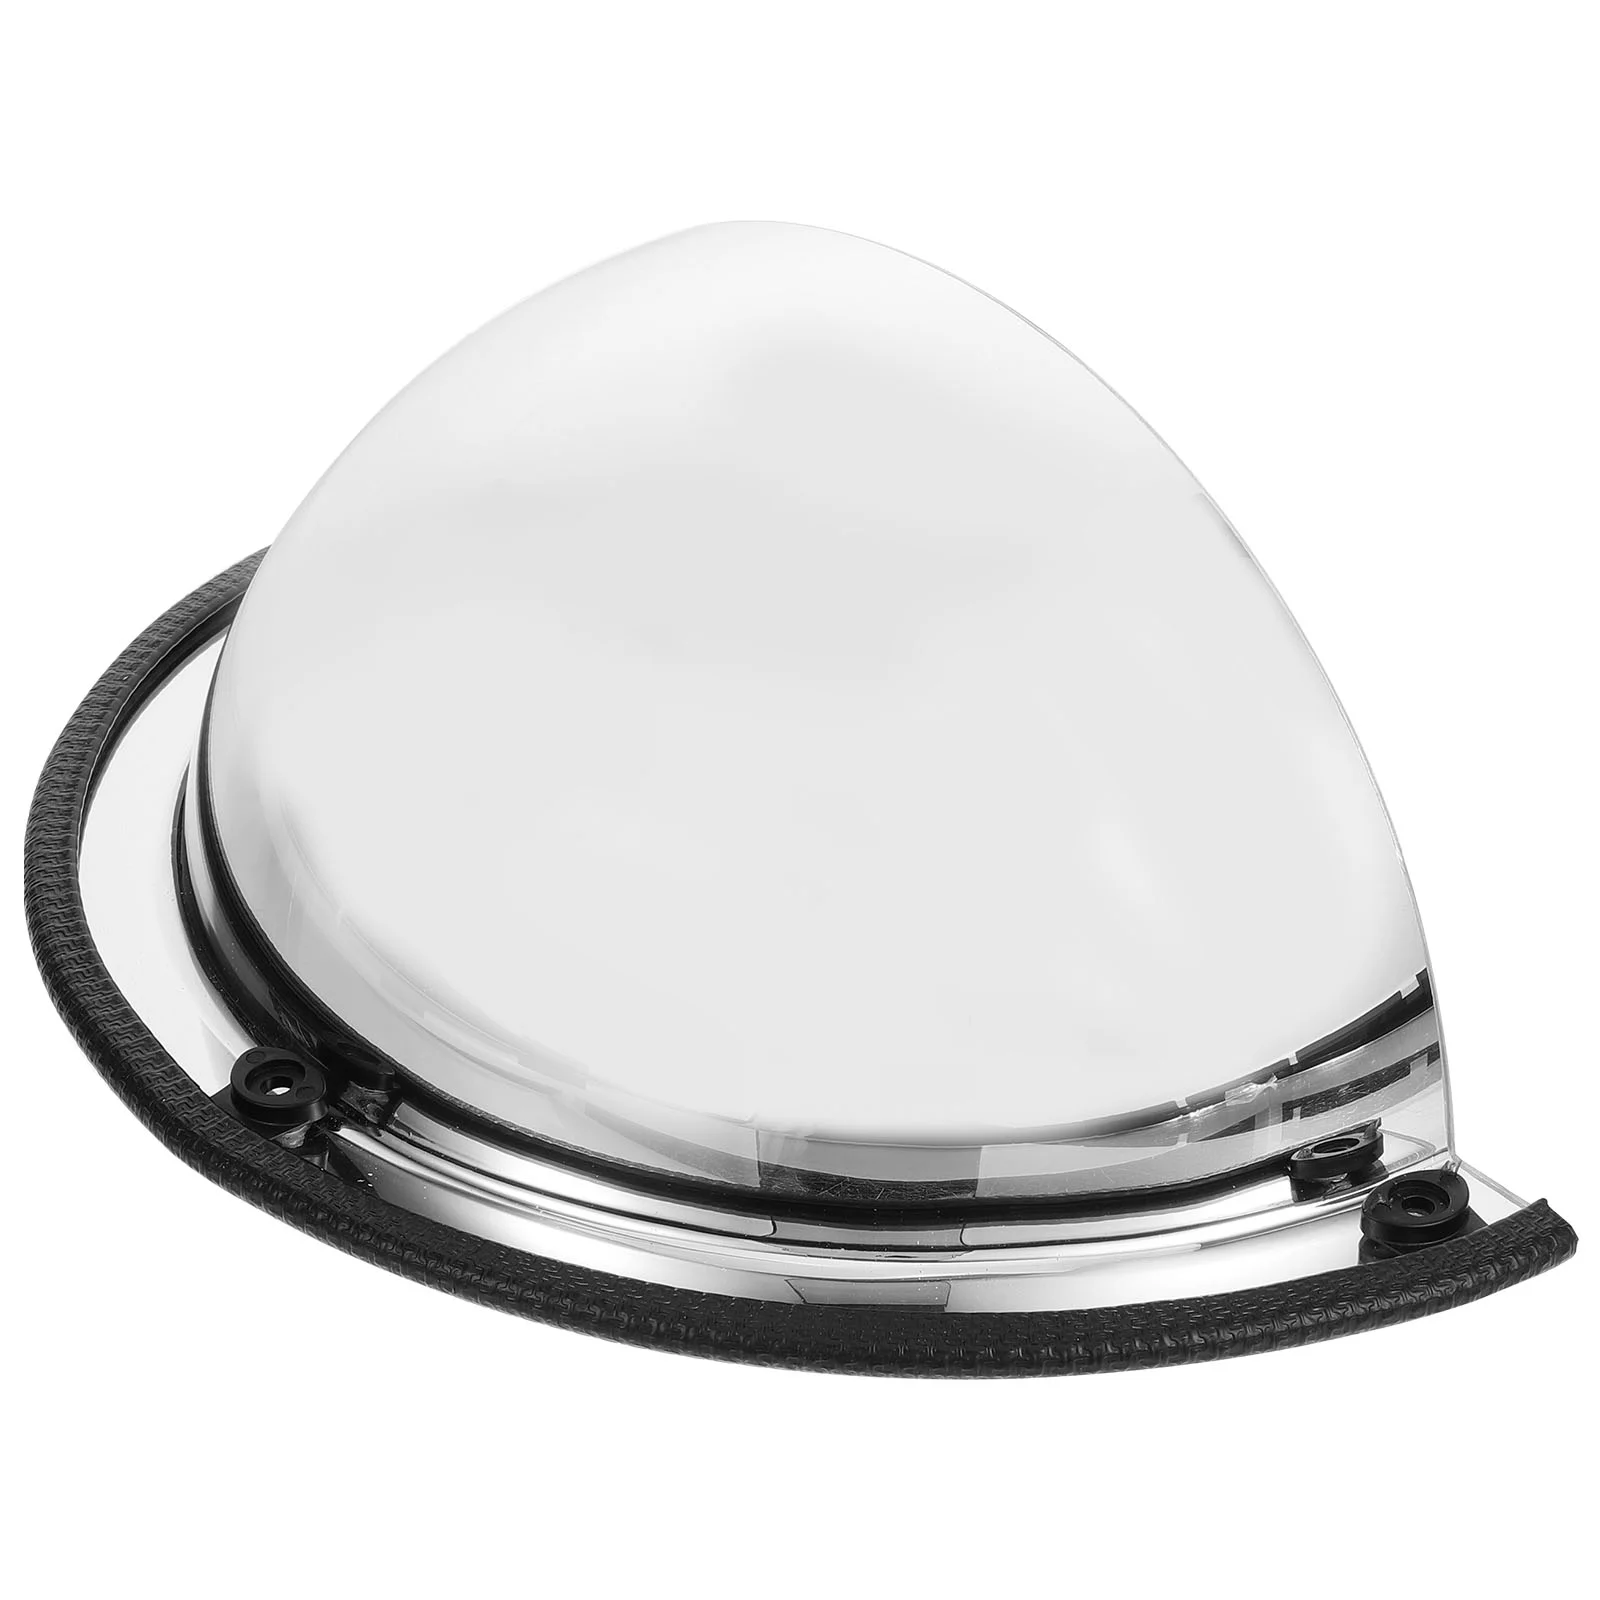 

Road Acrylic Convex Security Convex Mirror Convex for Wall Traffic Corner Anti-theft Outdoor Acrylic Convex Security Convex